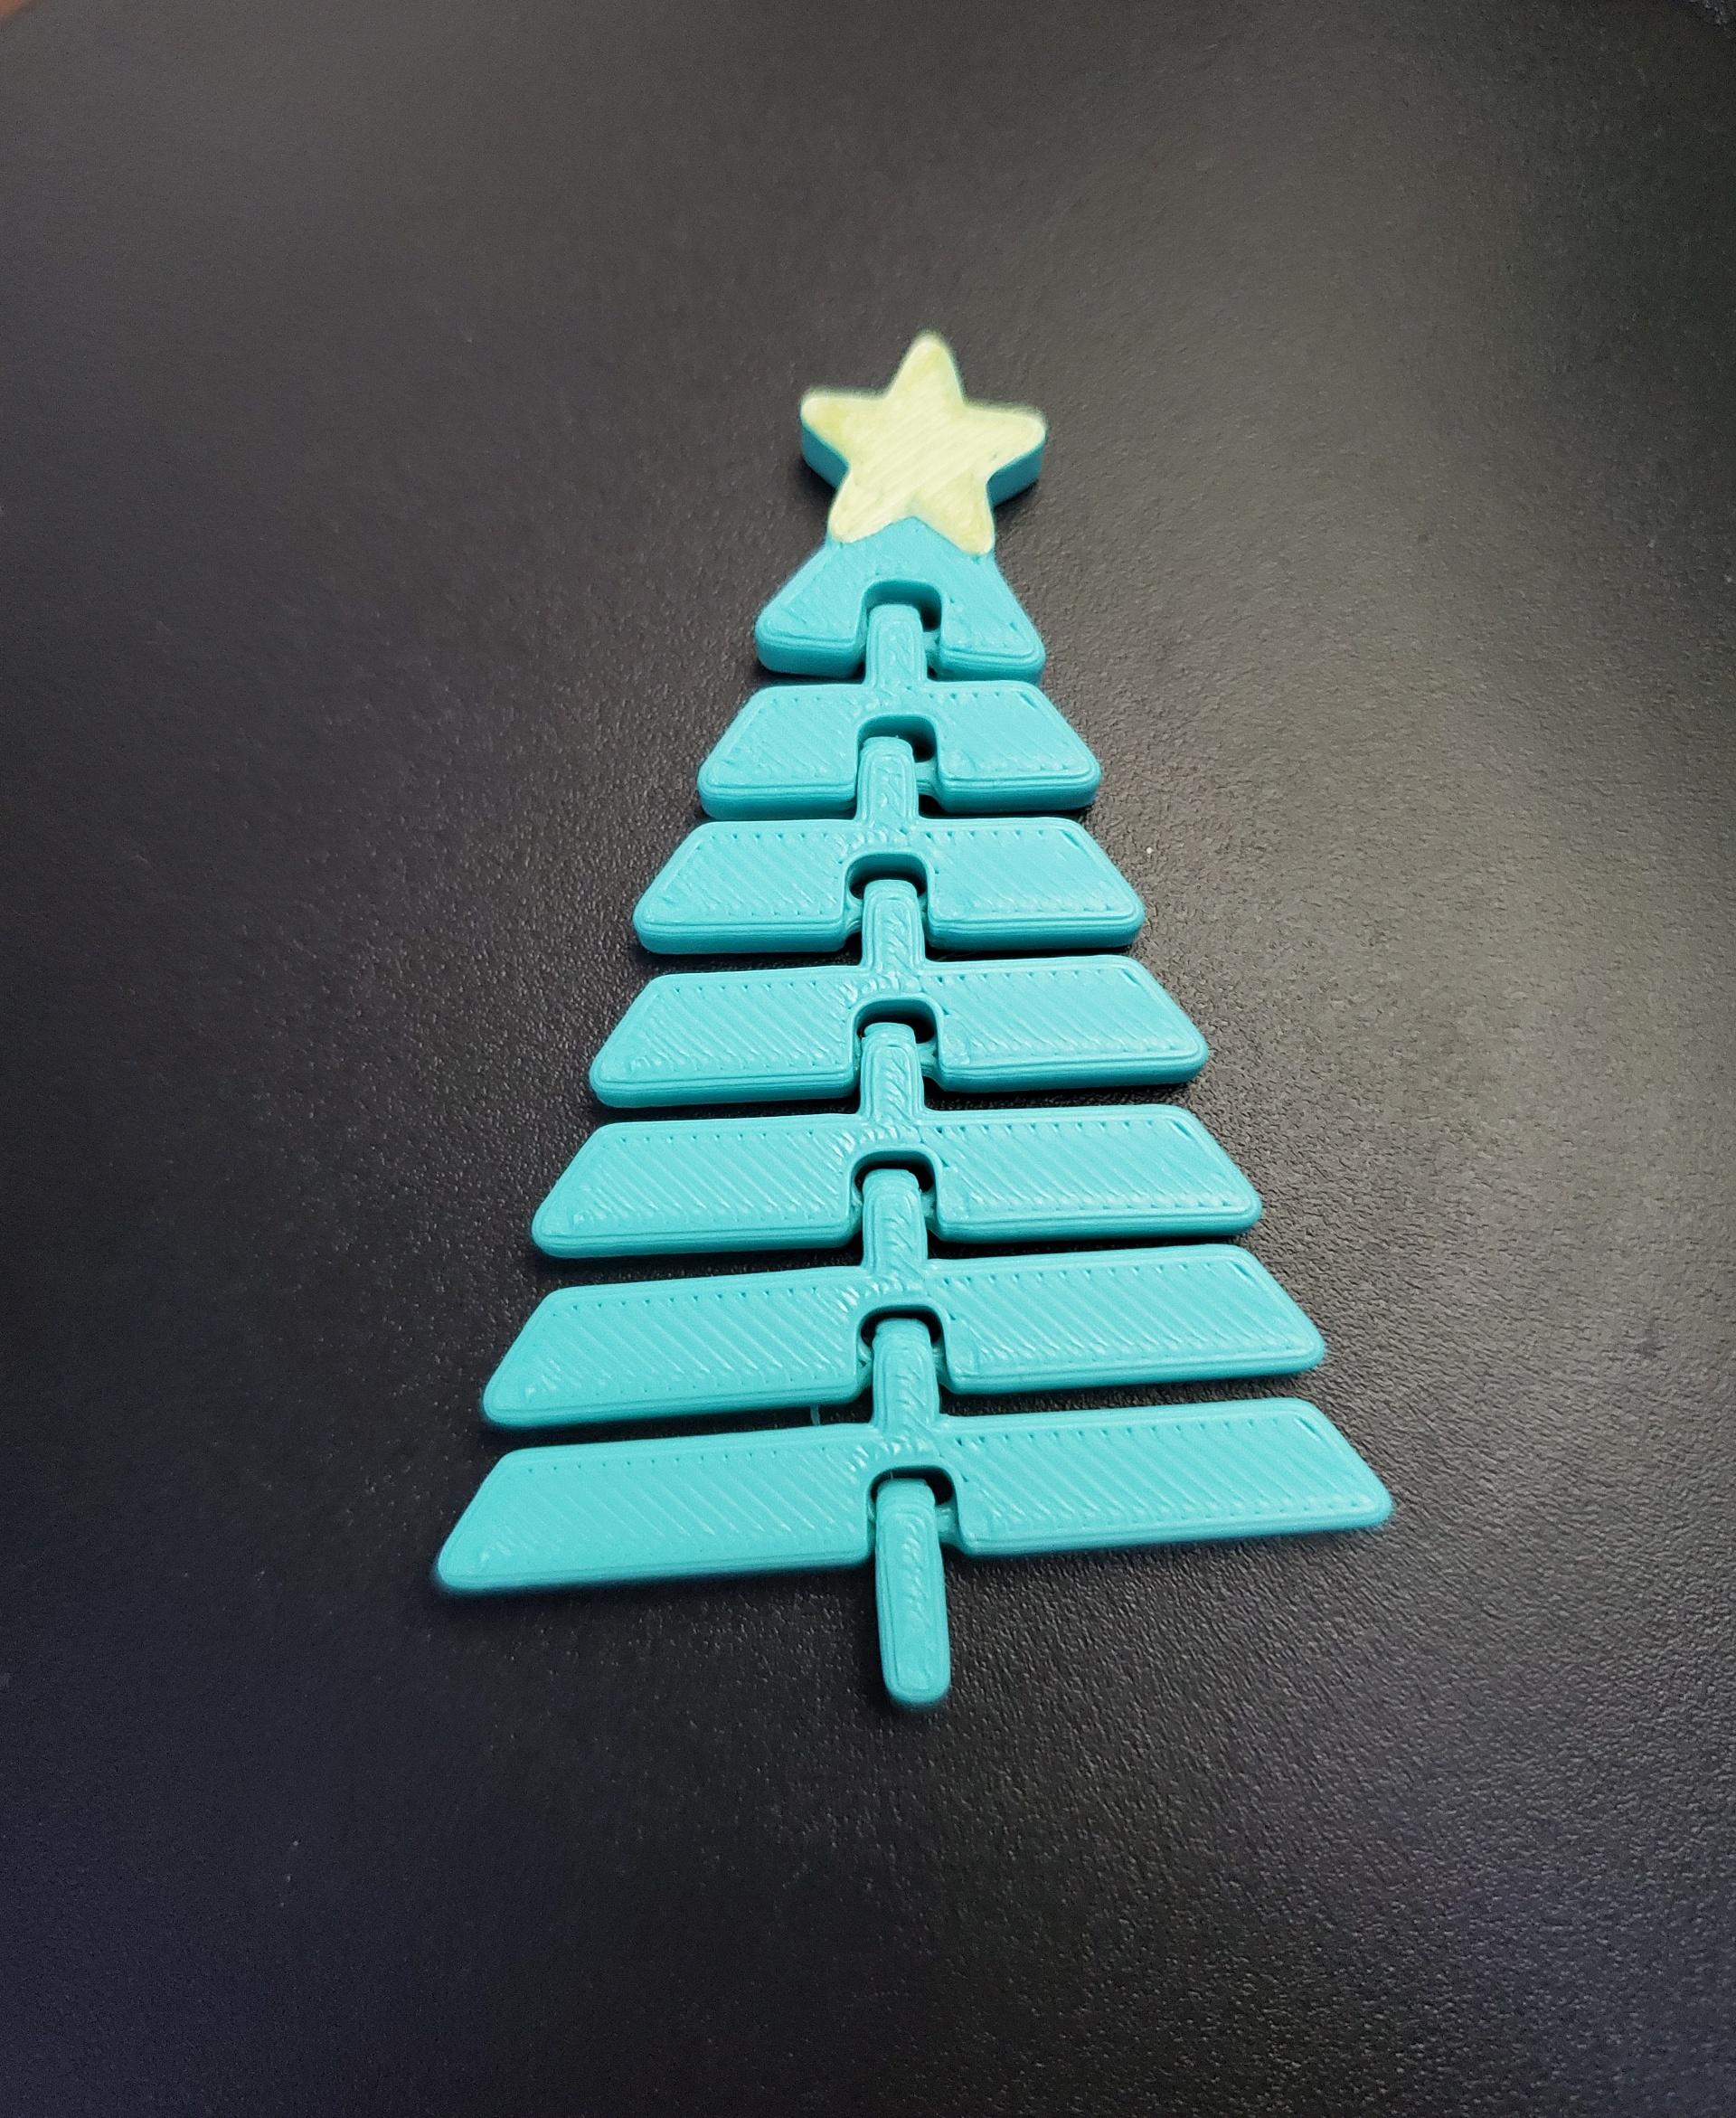 Articulated Christmas Tree with Star - Print in place fidget toy - 3mf - polymaker teal pla pro - 3d model